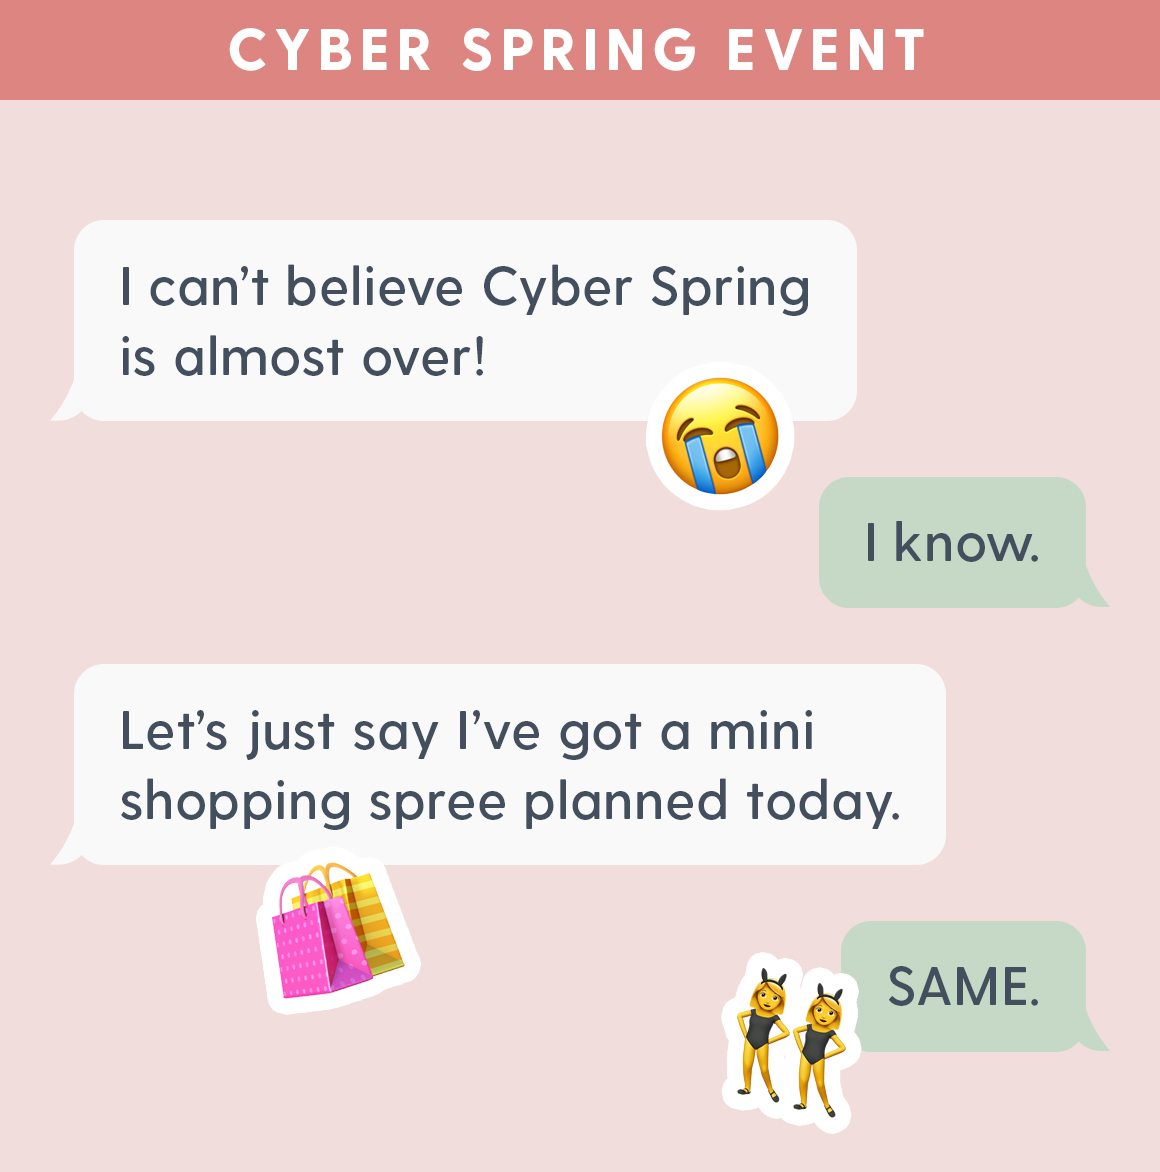 Cyber Spring Event. I can't believe Cyber Spring is almost over!